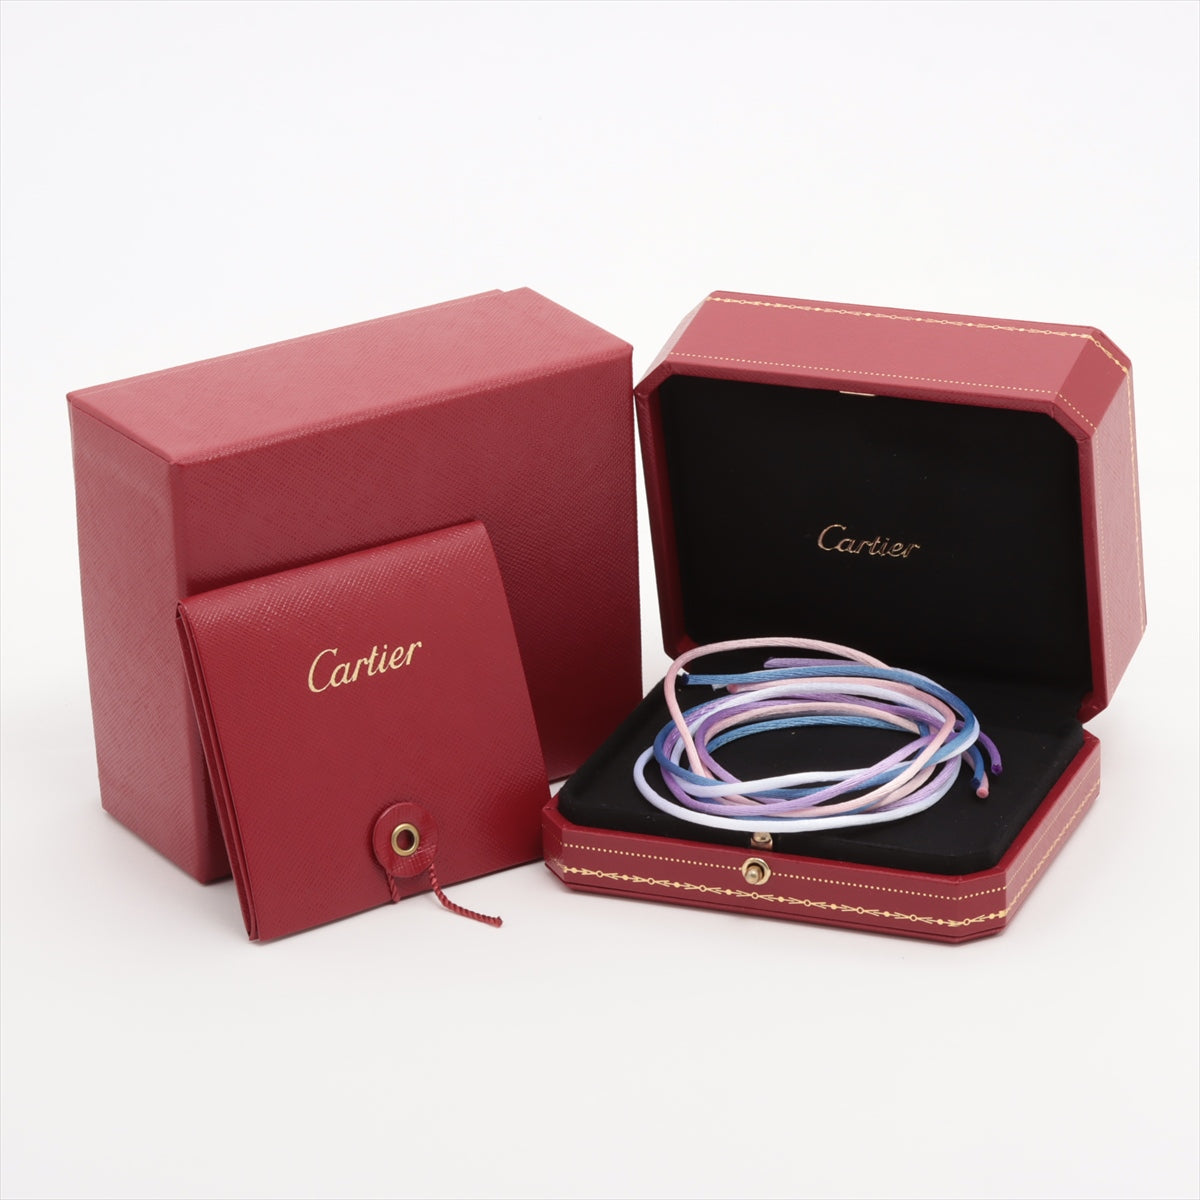 Cartier Trinity Code Bracelet 750 (YGPG×WG) Total 2.7g  4 replacement codes